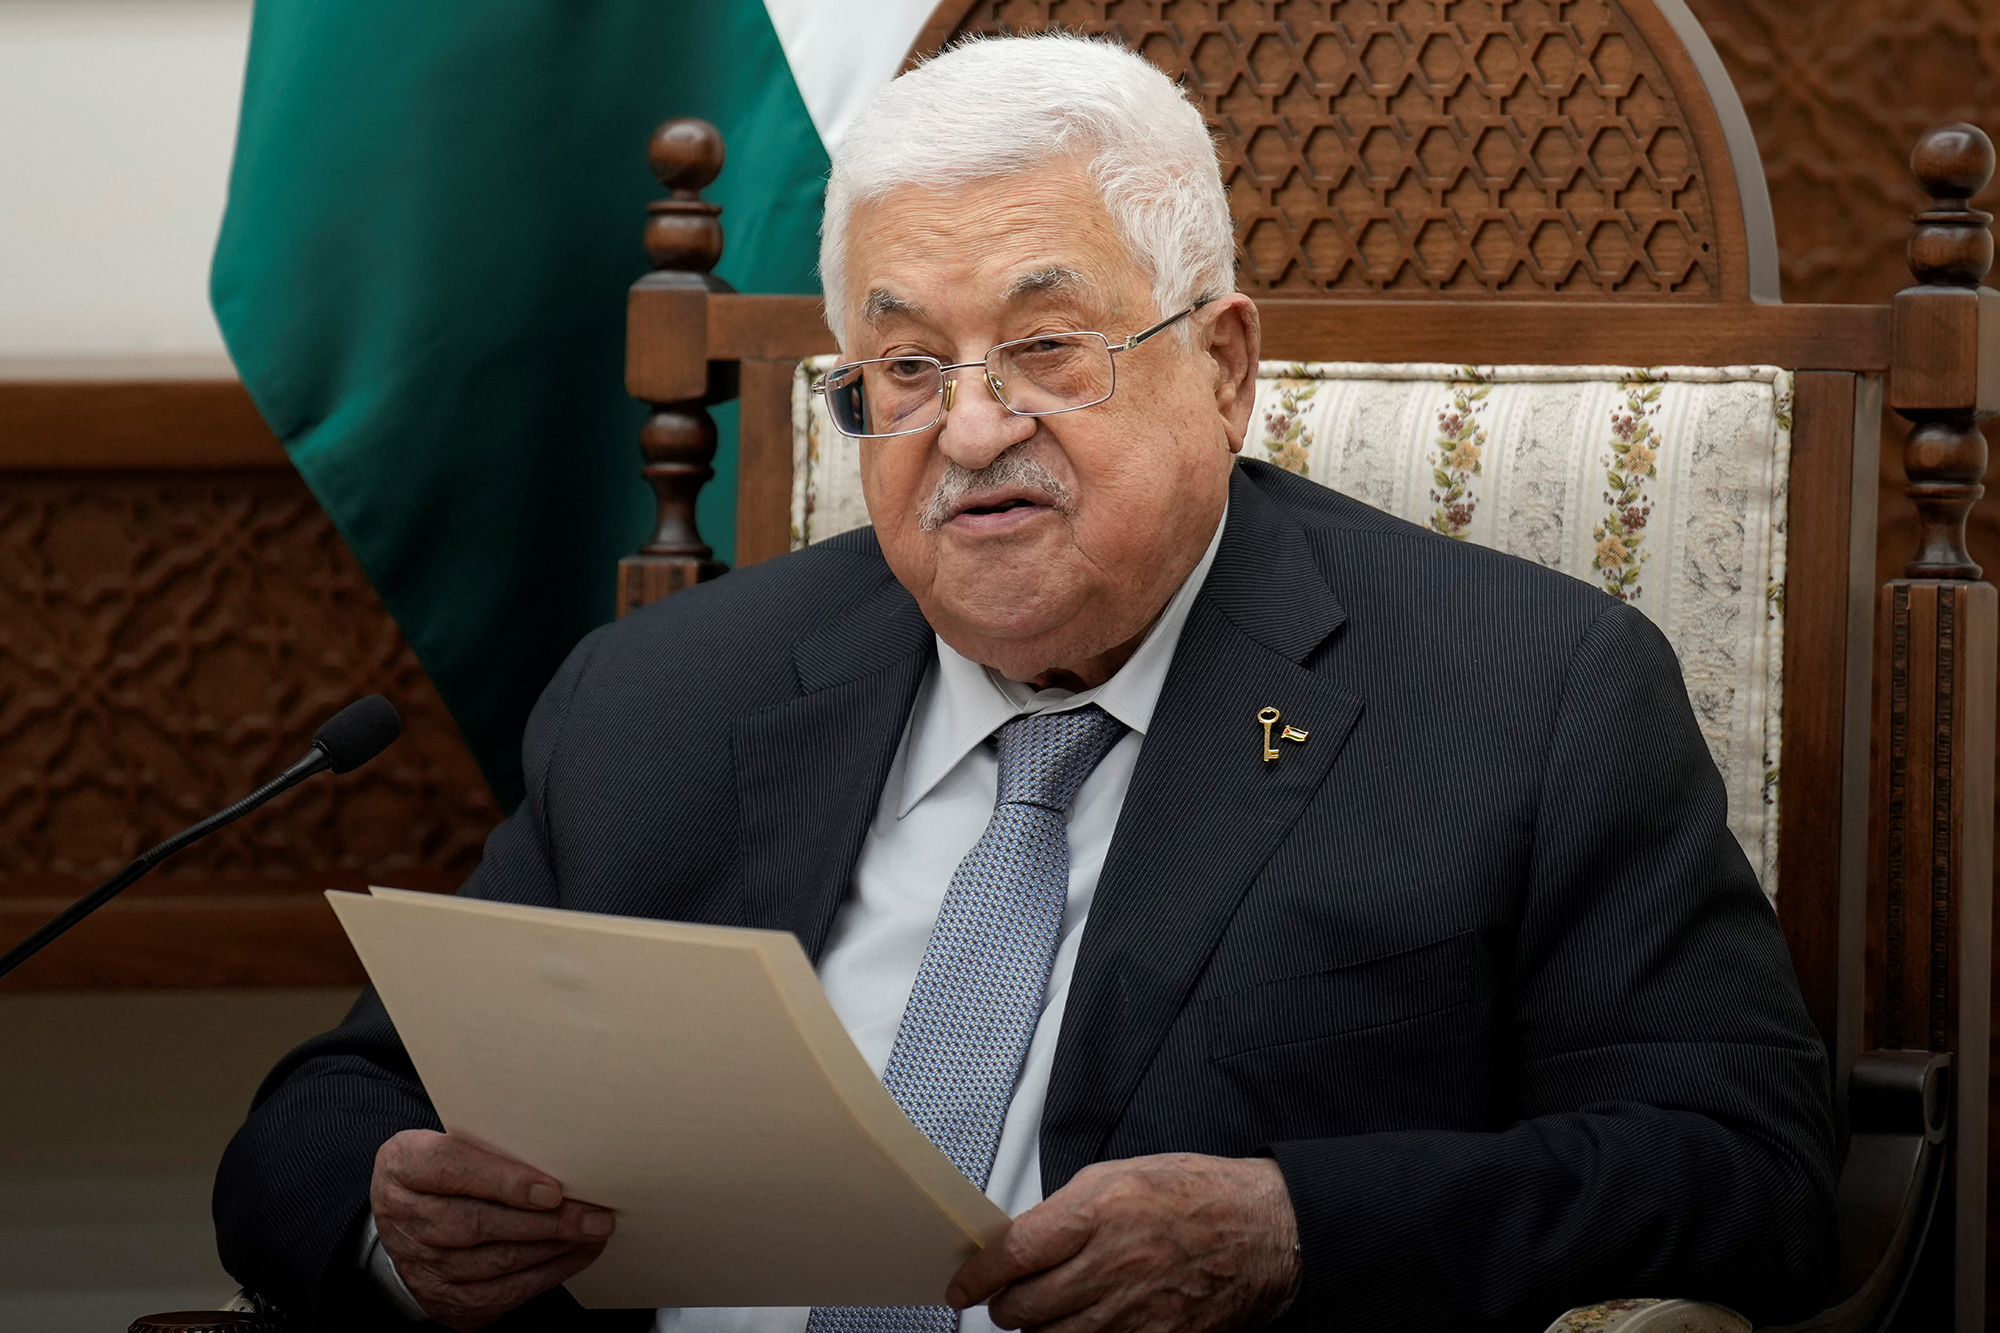 Palestinian President Mahmoud Abbas speaks during a meeting in the West Bank city of Ramallah on October 24.